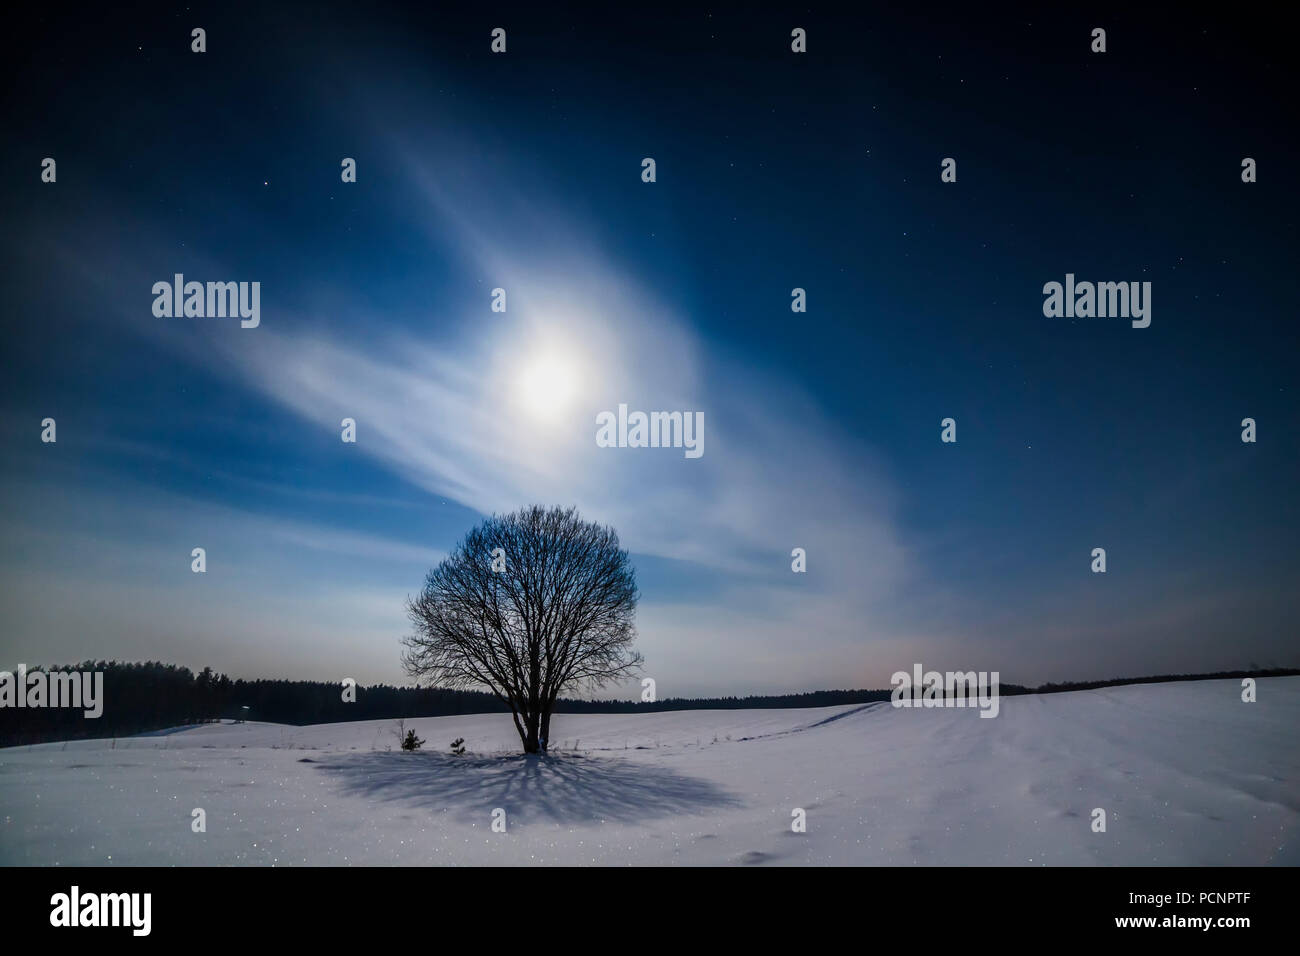 Fairy winter night in a valley with full moon in a starry sky. Lonely tree. Stock Photo